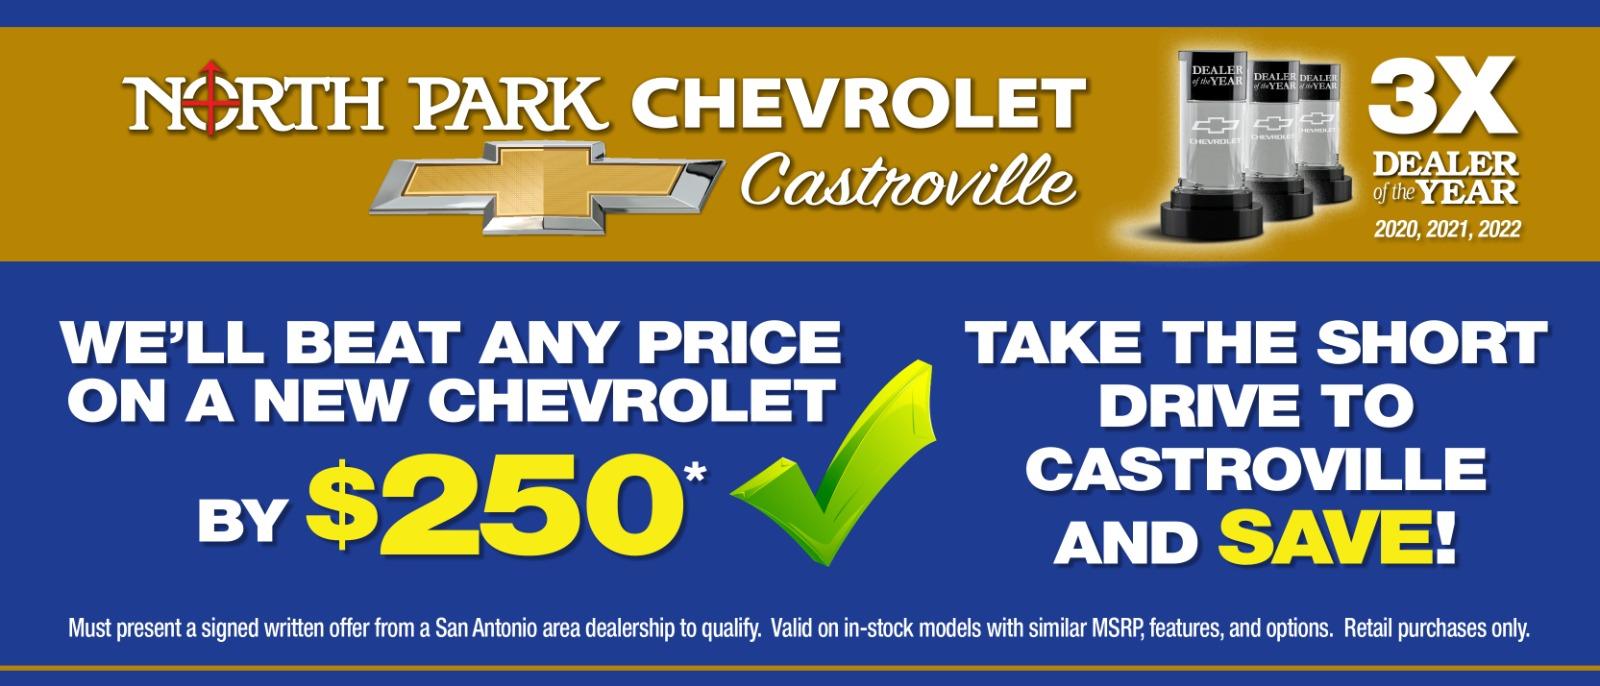 WE'LL BEAT ANY PRICE ON A NEW CHEVROLET BY $250*
TAKE THE SHORT DRIVE TO CASTROVILLE AND SAVE!